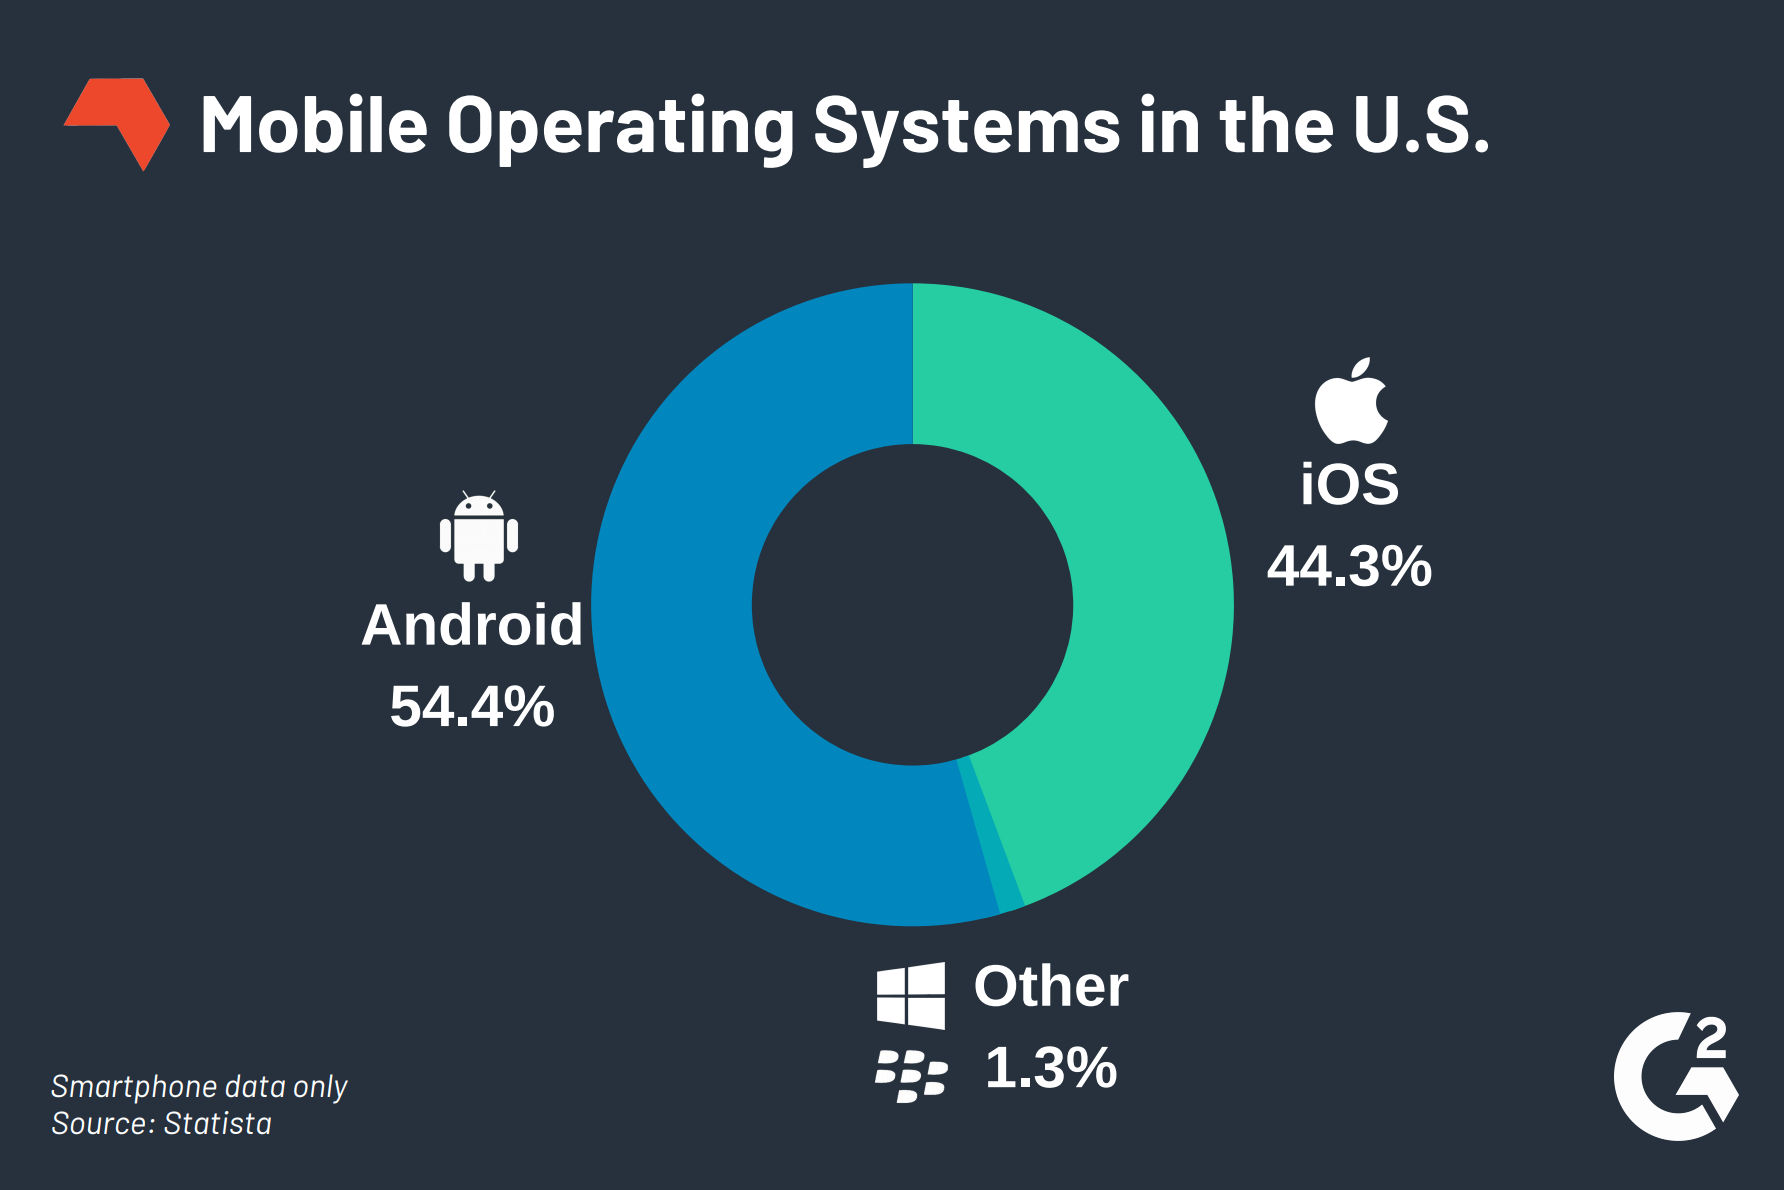 Mobile operating systems - what are they and which is best?